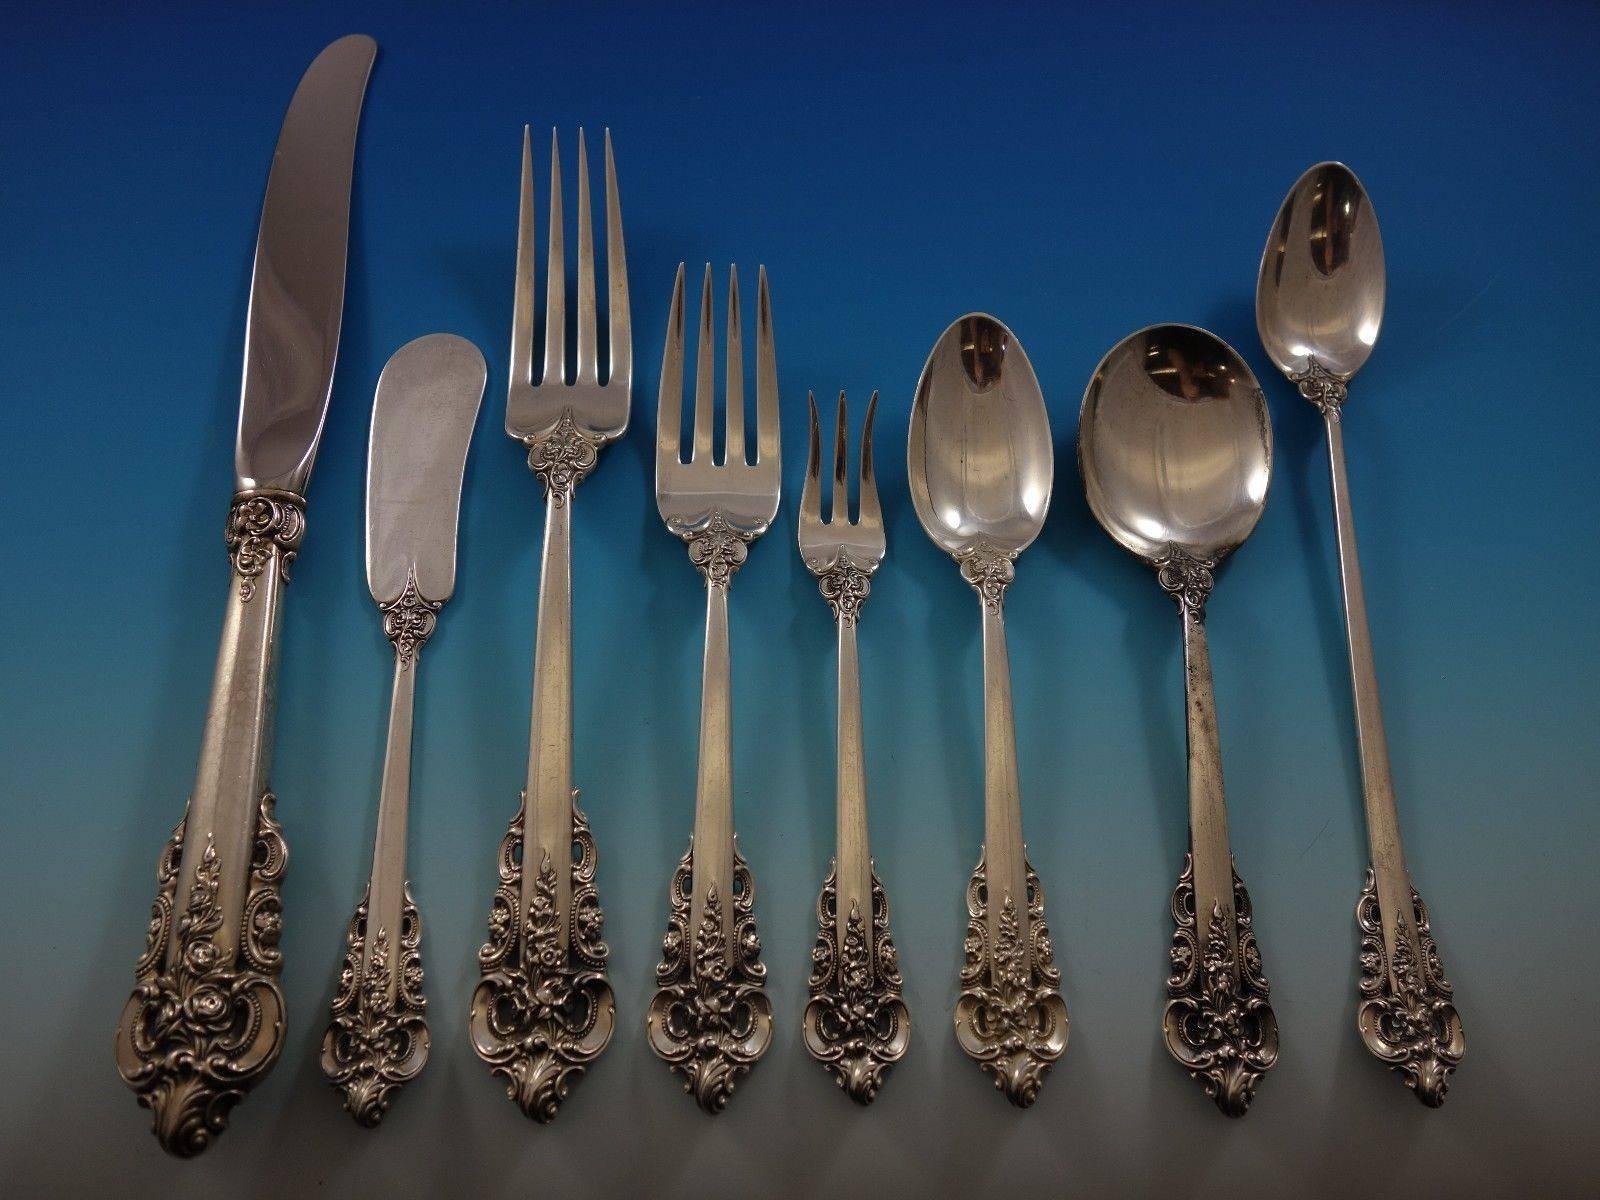 Grande Baroque by Wallace sterling silver flatware set of 203 pieces. This set includes: 

24 dinner knives, 9 3/4